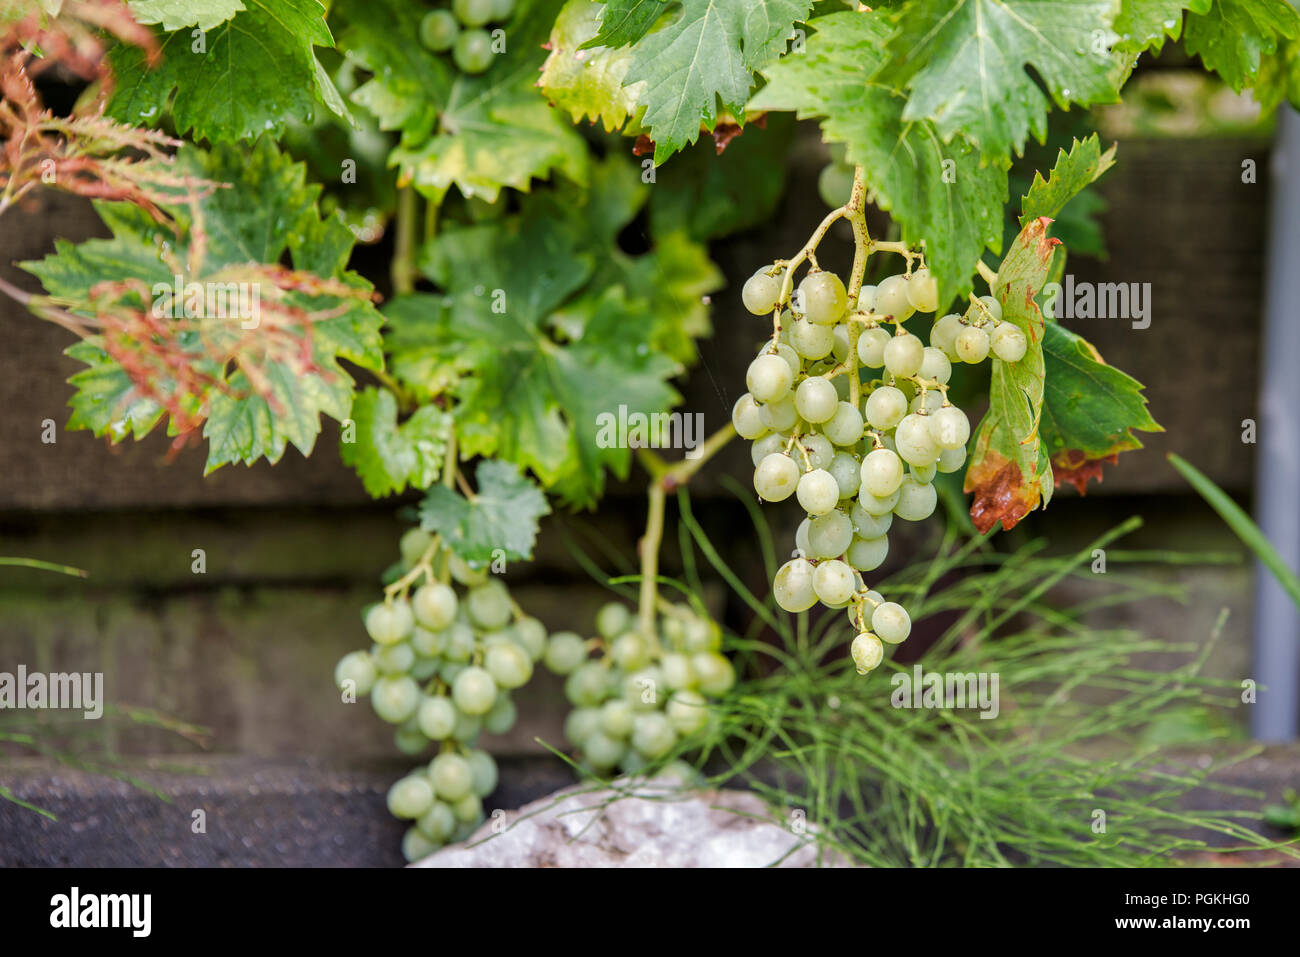 large bunches of white grapes hang ready to be picked for grape juice or red wine Stock Photo